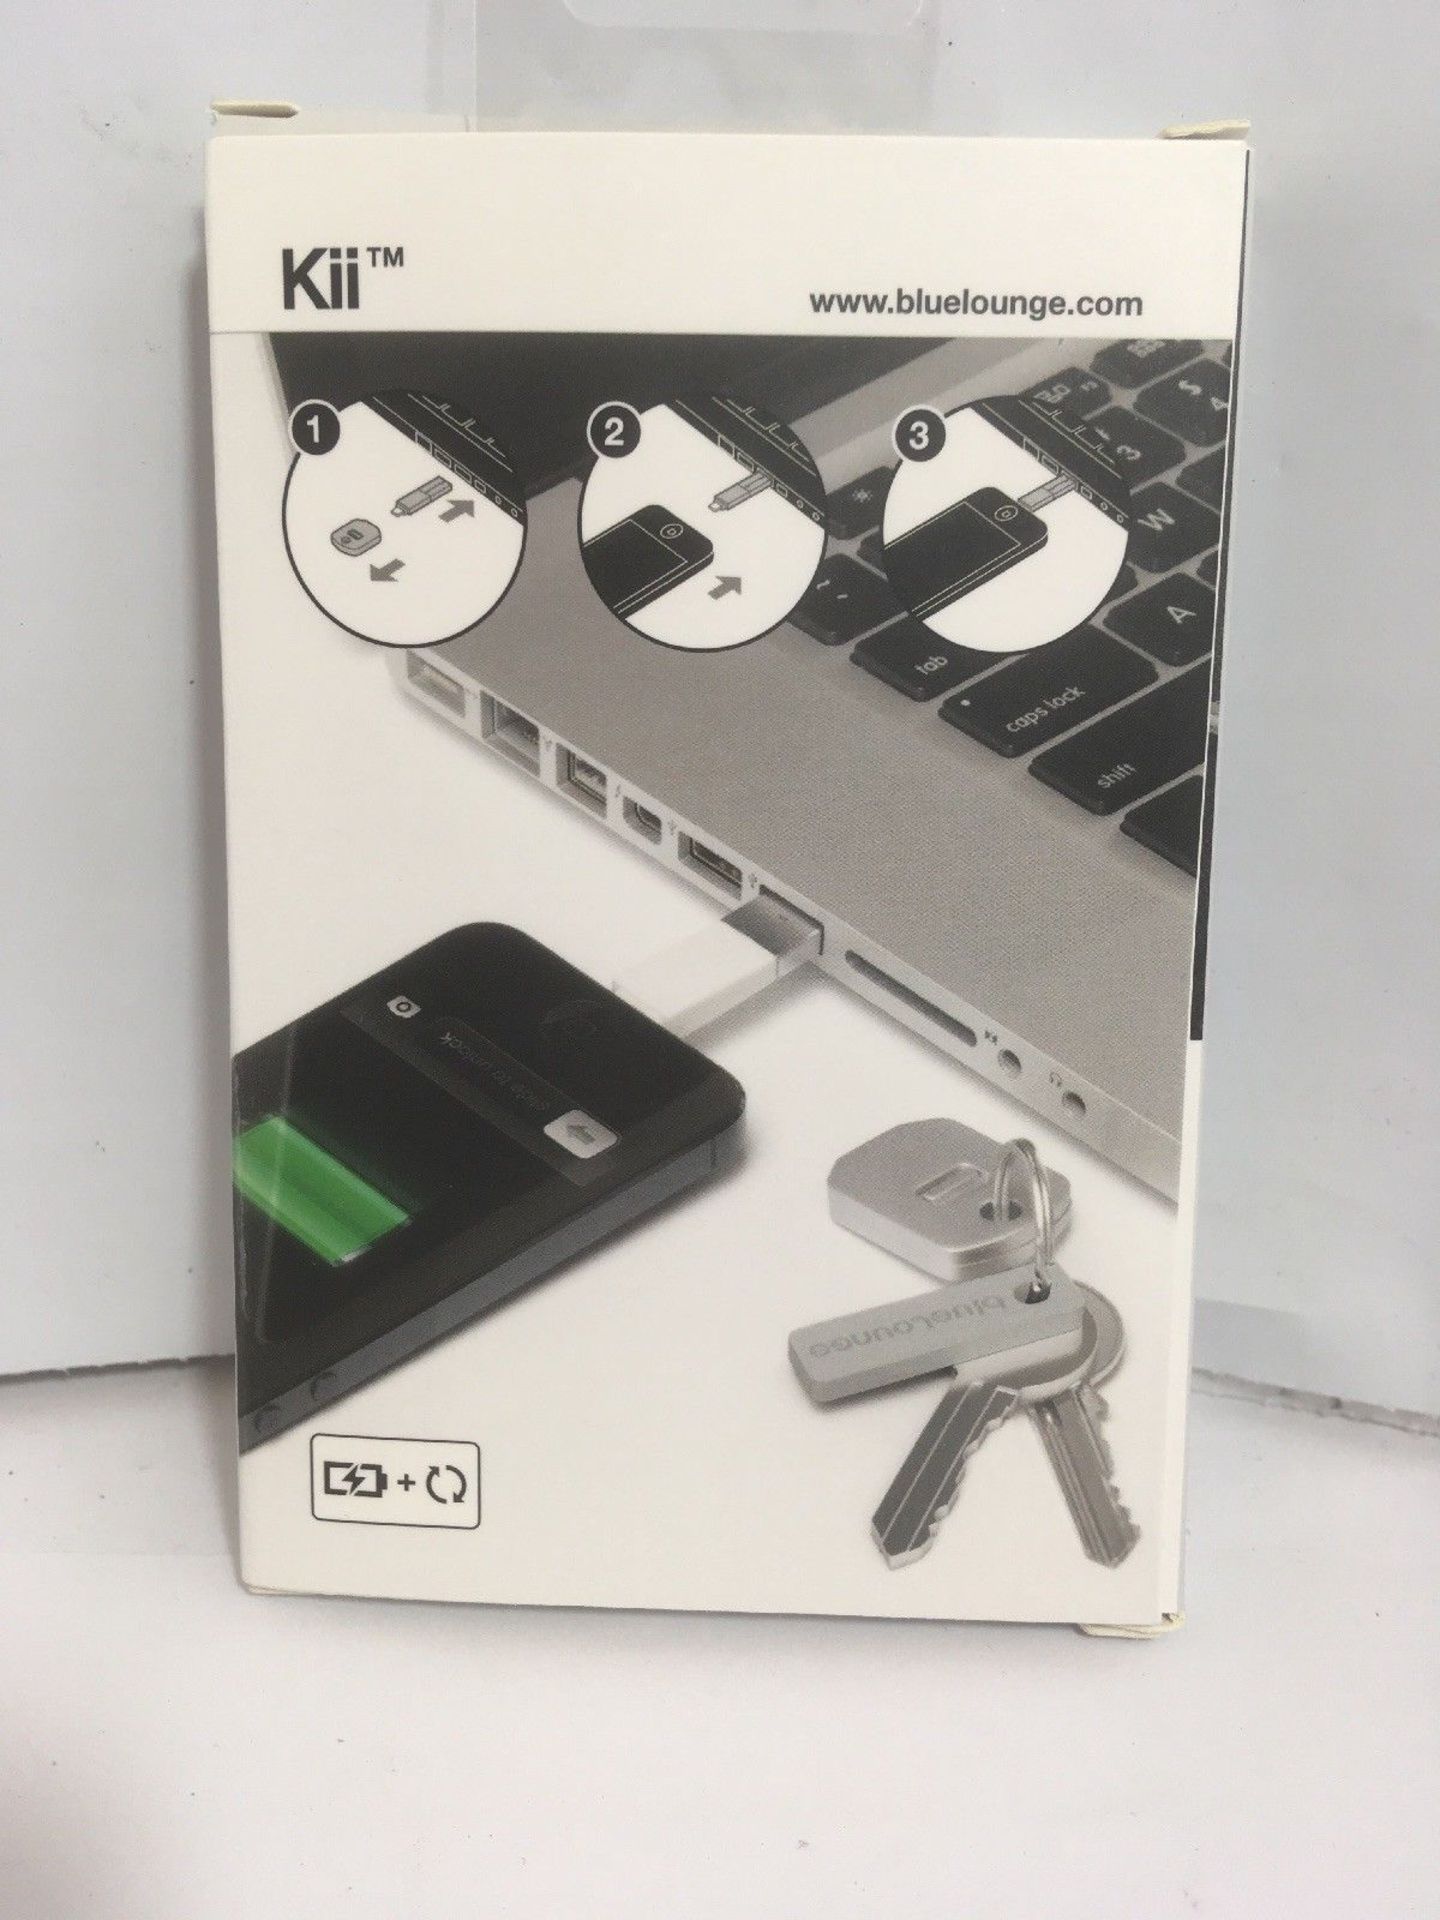 Bluelounge Kii USB(M) to Lightning(M) Adapter for Apple devices - White - Image 3 of 3